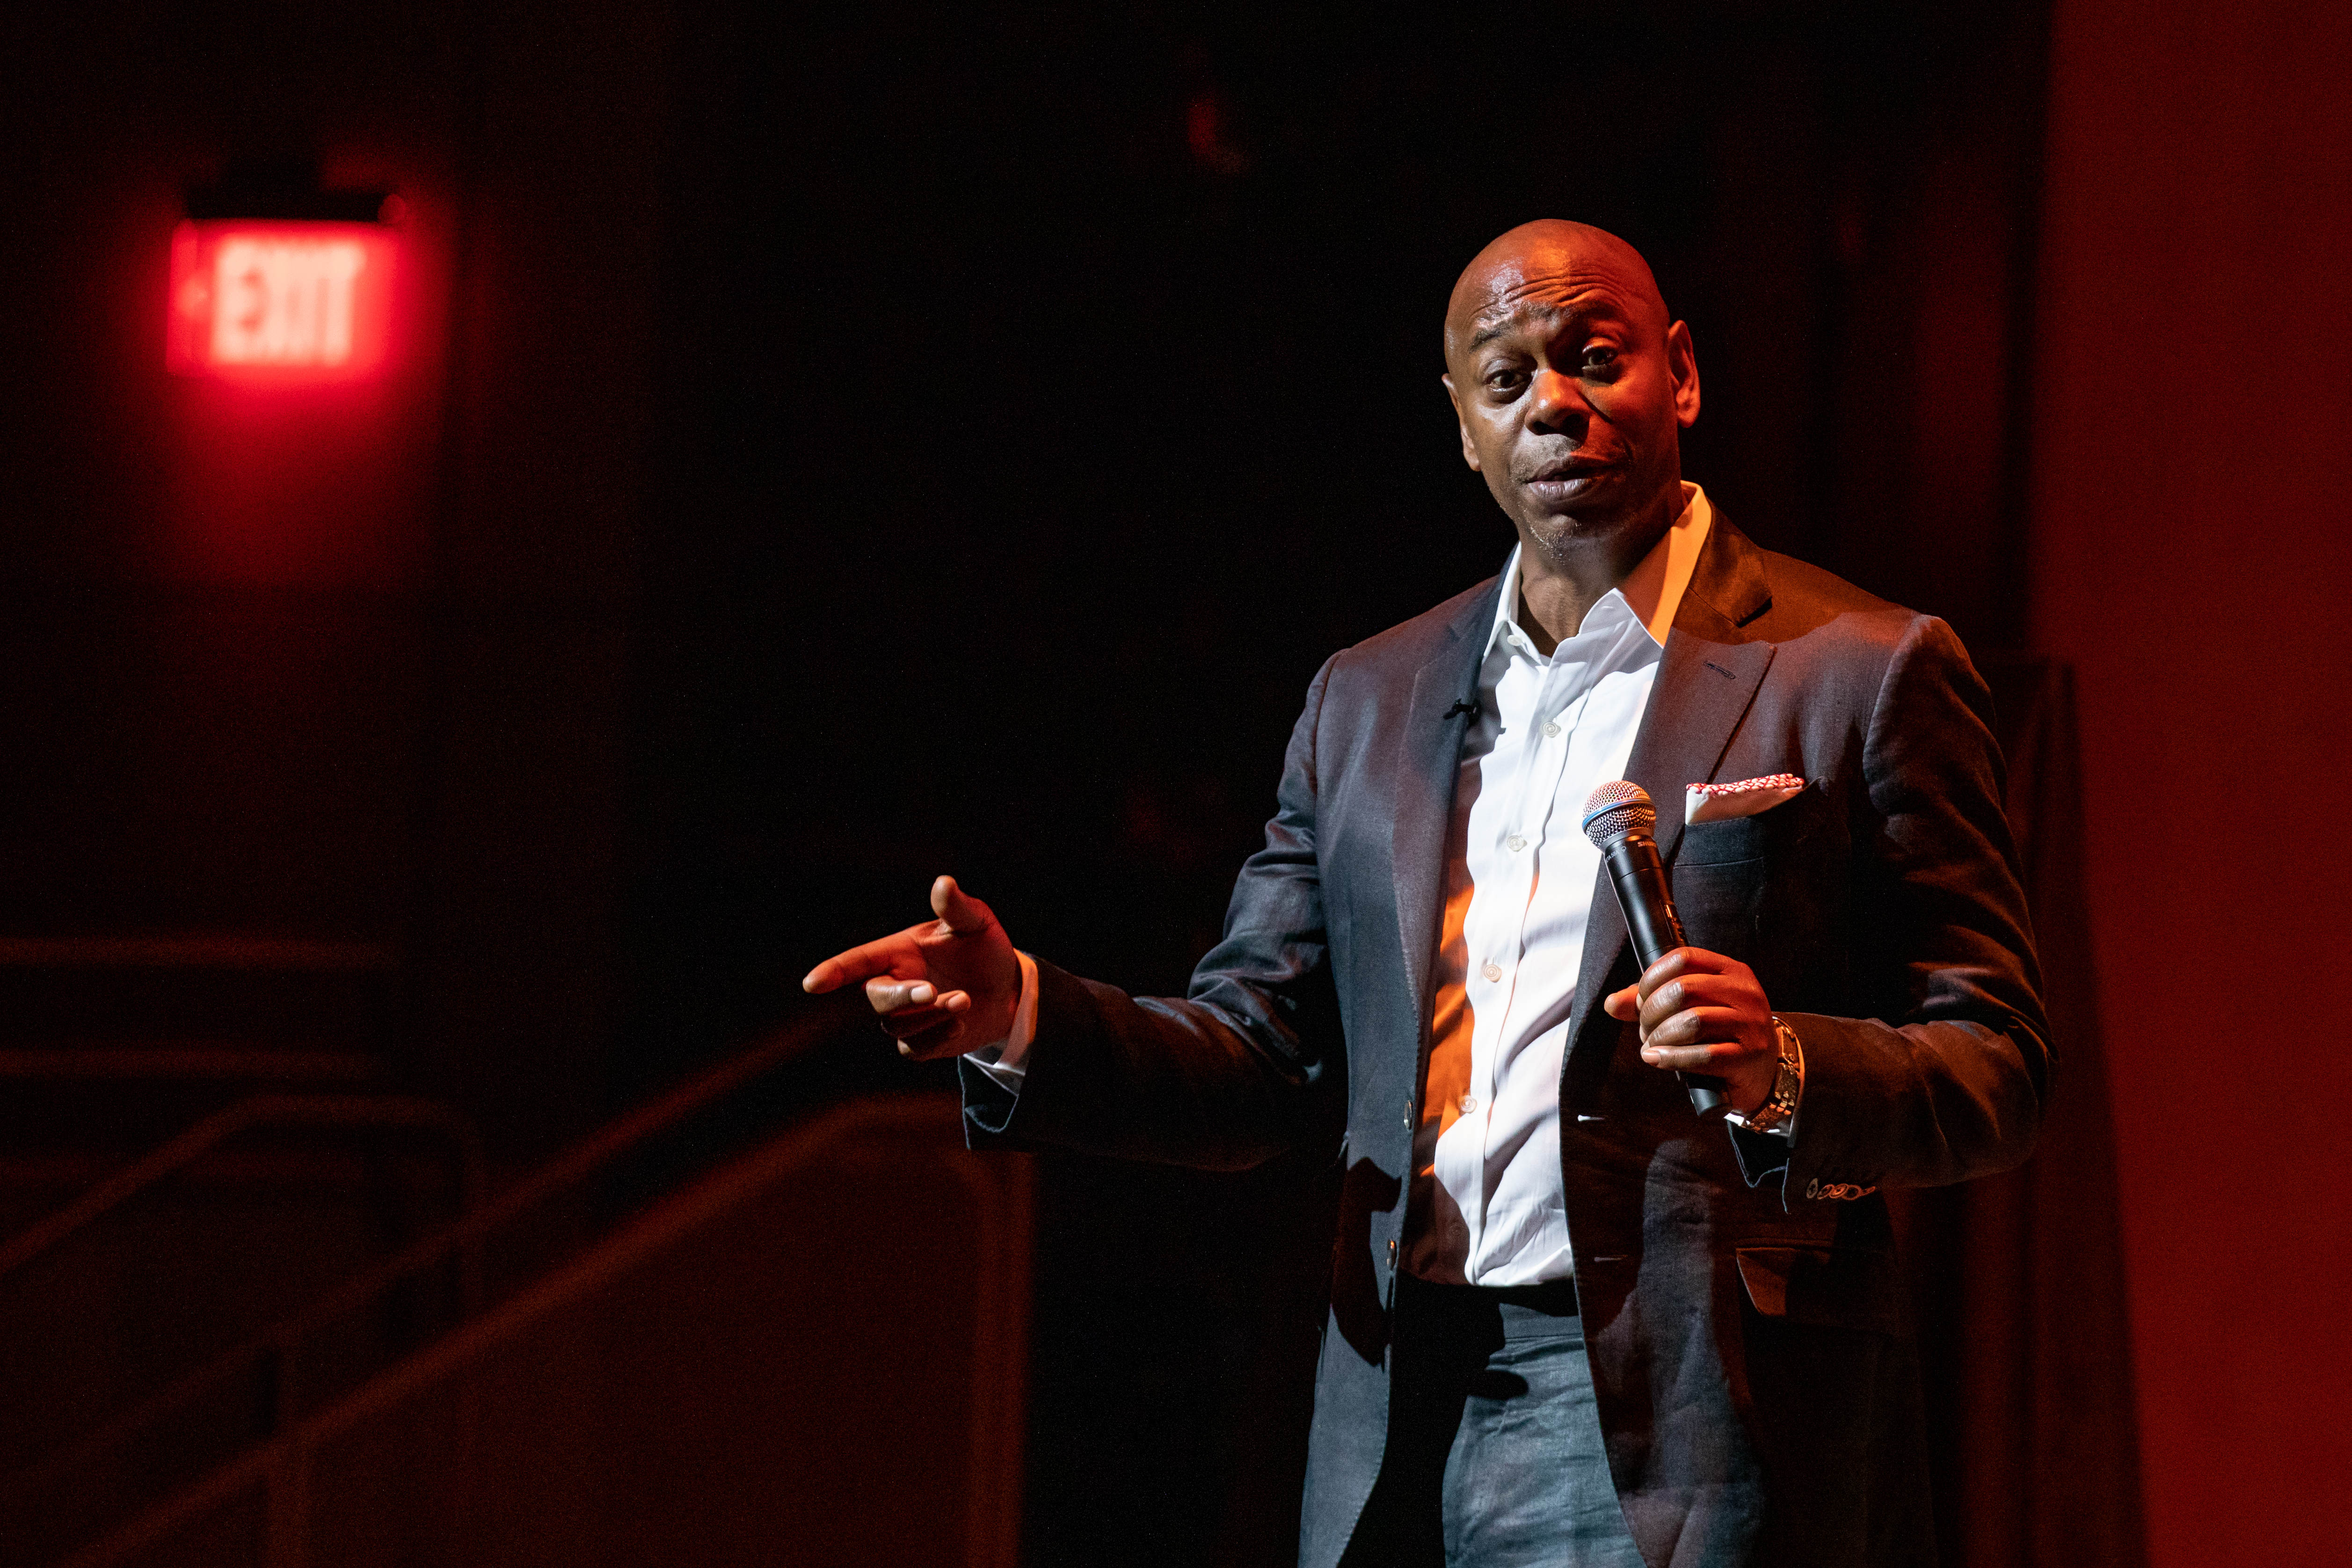 Dave Chappelle is pictured as he speaks at the dedication of the theater at the Duke Ellington School of the Arts on June 20, 2022, in Washington, D.C. | Source: Getty Imagesmages